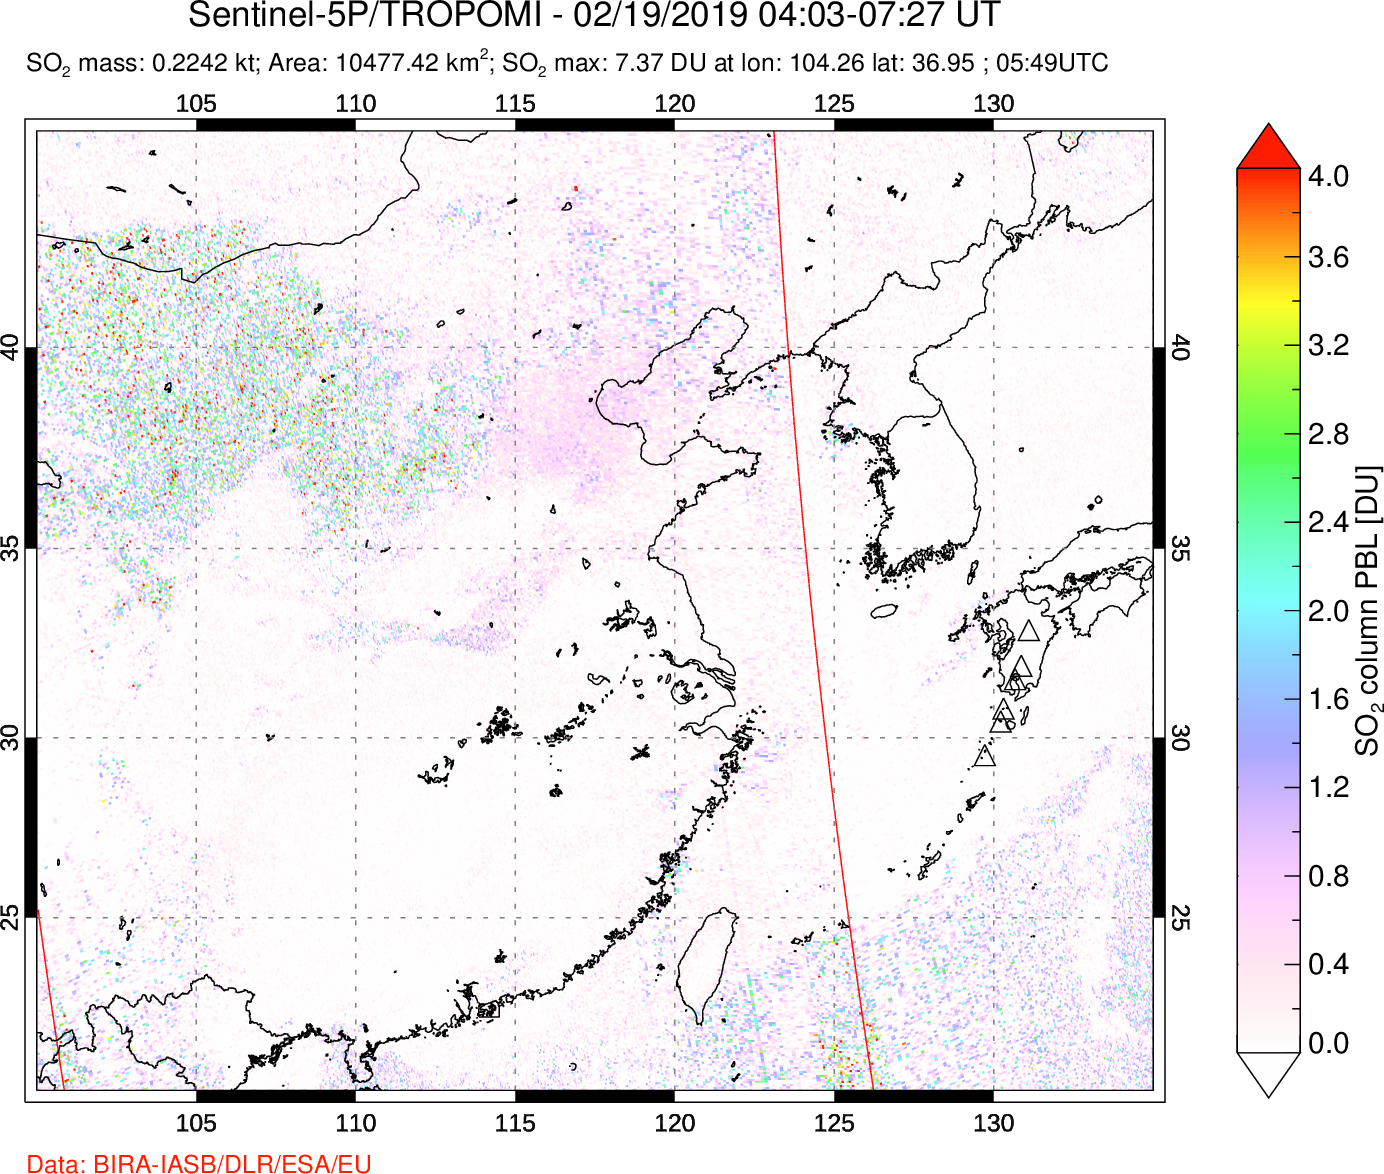 A sulfur dioxide image over Eastern China on Feb 19, 2019.